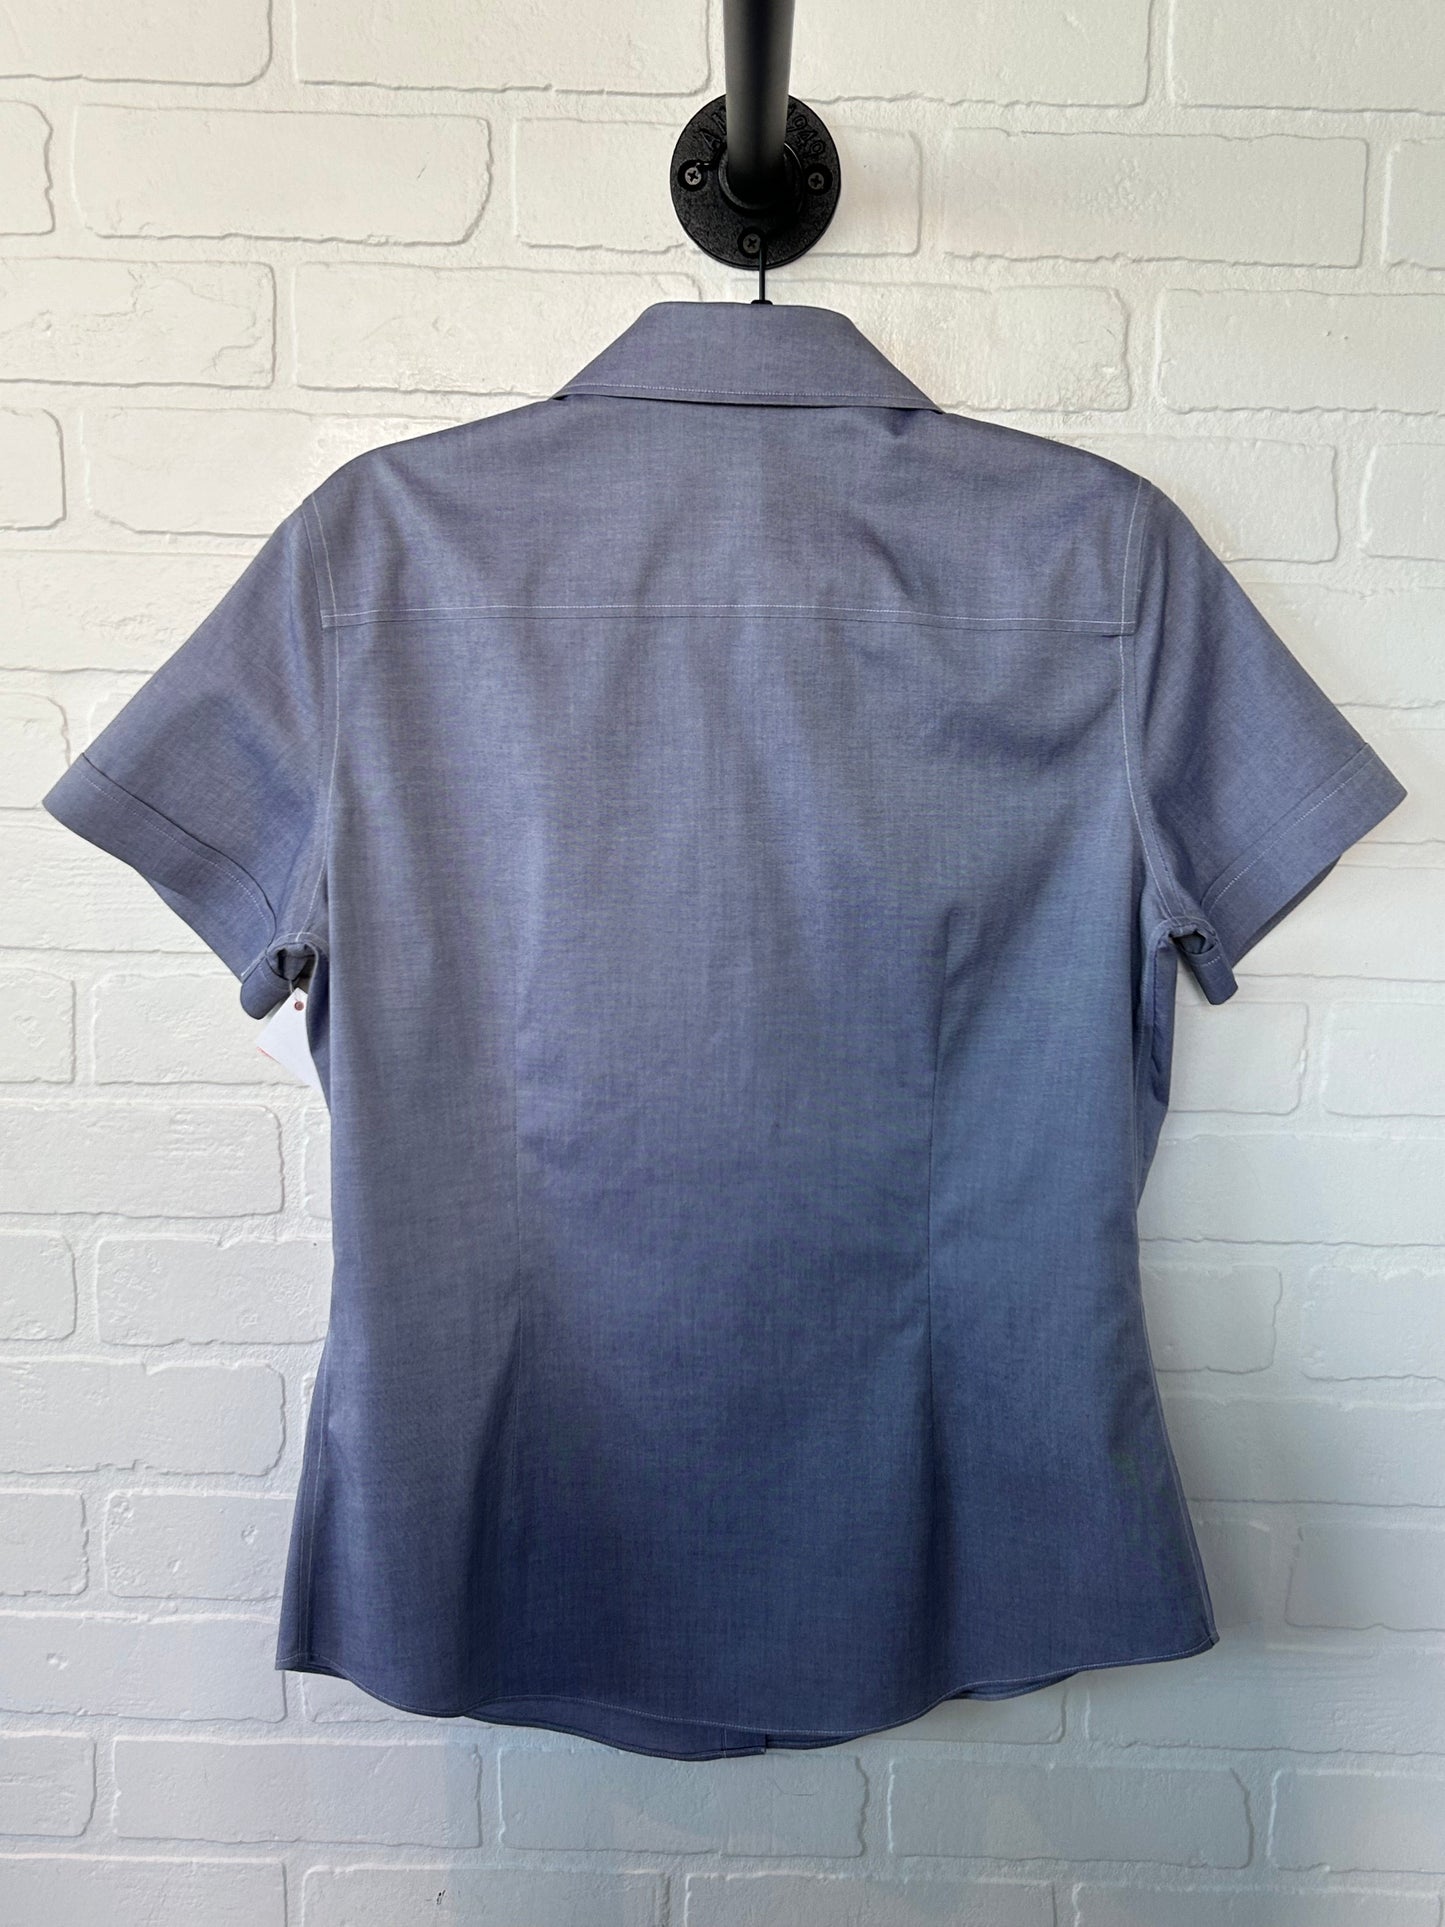 Blue Top Short Sleeve Brooks Brothers, Size M